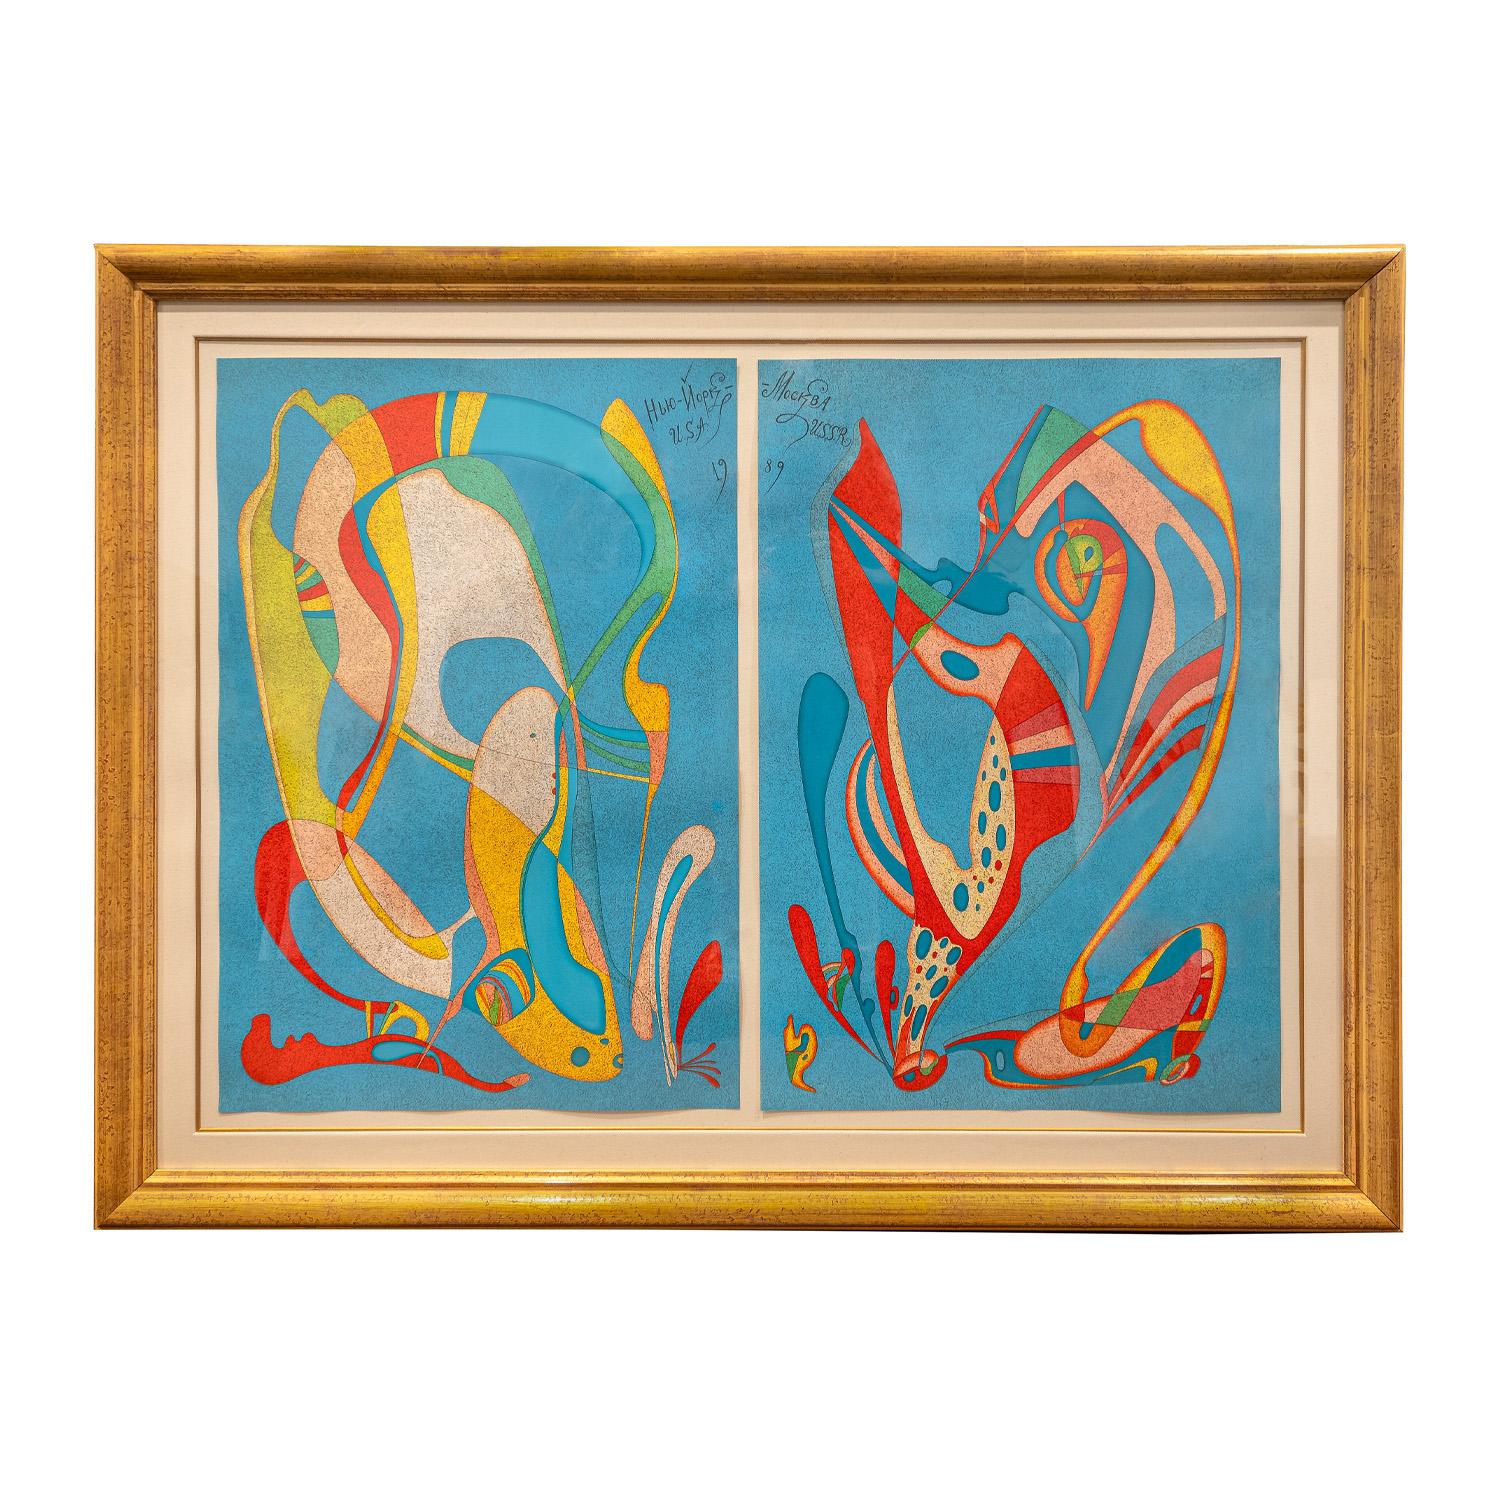 Large abstract pair of lithographs “Moscow Museum Commemorative Suite (Diptych), 1989,” in vibrant colors on paper by Mihail Chemiakin, Russia 1989 (signed and numbered “M. Chemiakin 44/125” in bottom right corner).  Both lithographs are beautifully